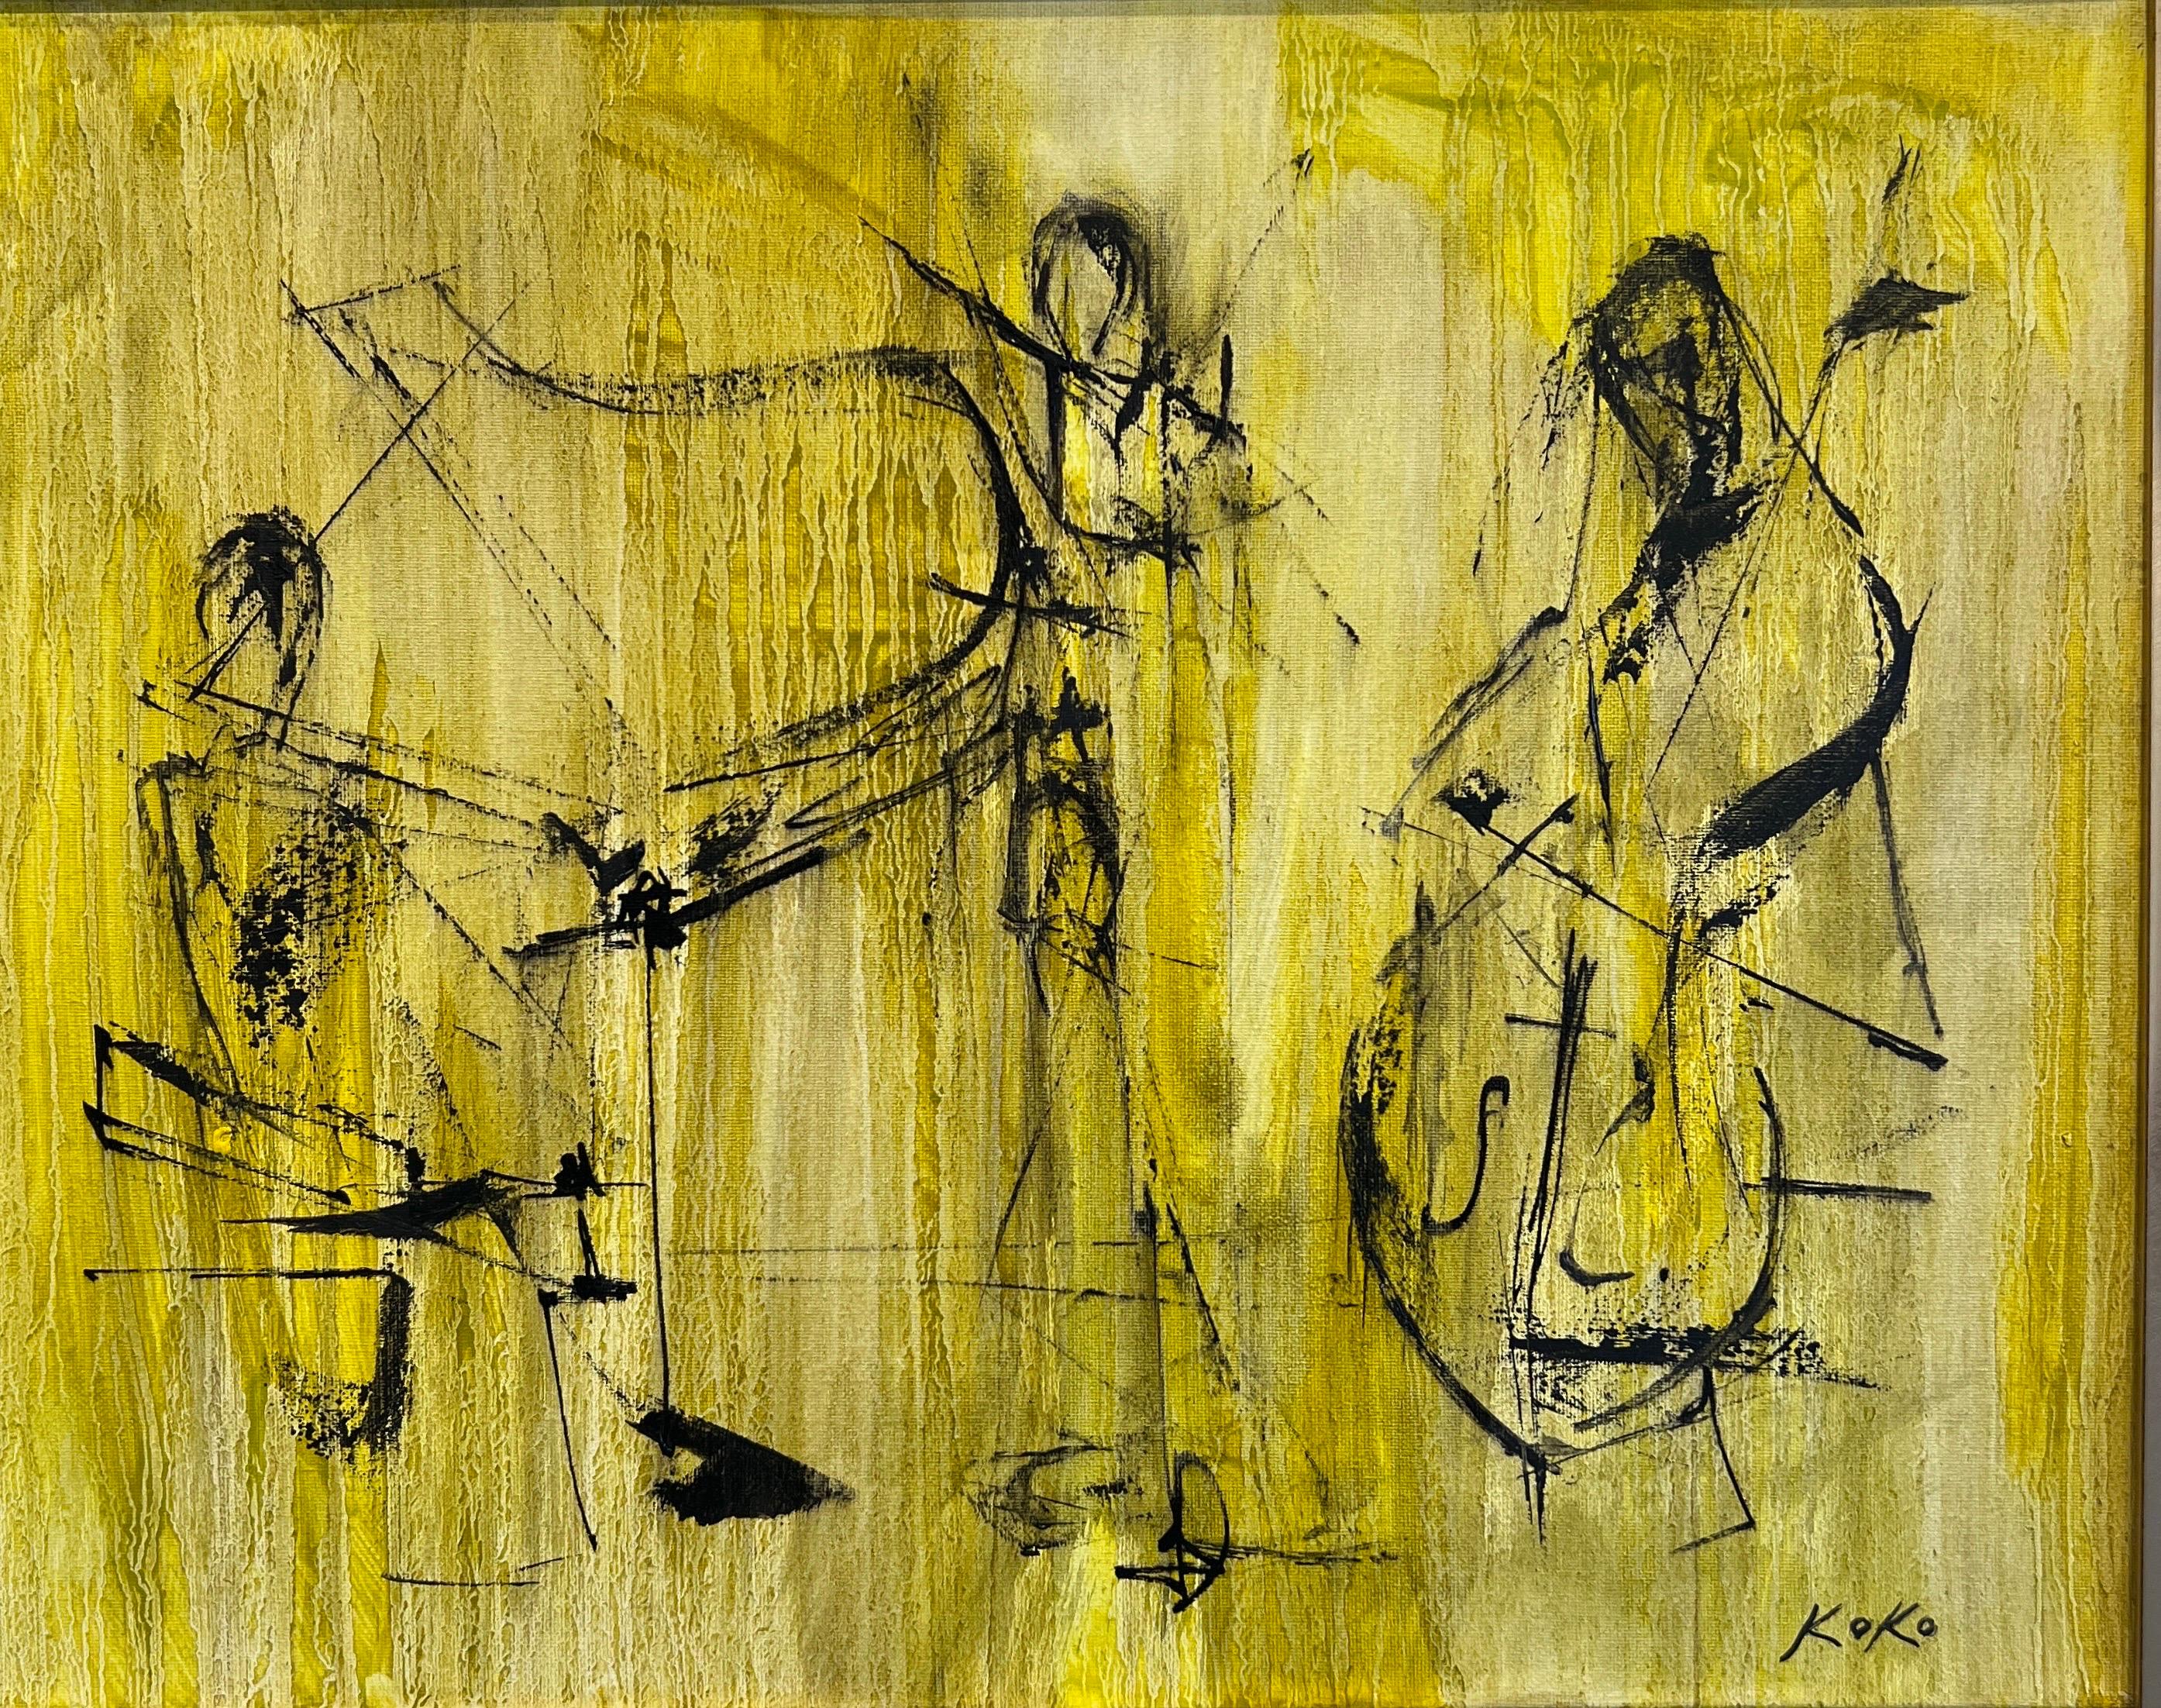 Contemporize Musical Essence  ,  Monochromatic Musicians, in deep yellow.  - Painting by KOKO HOVAGUIMIAN